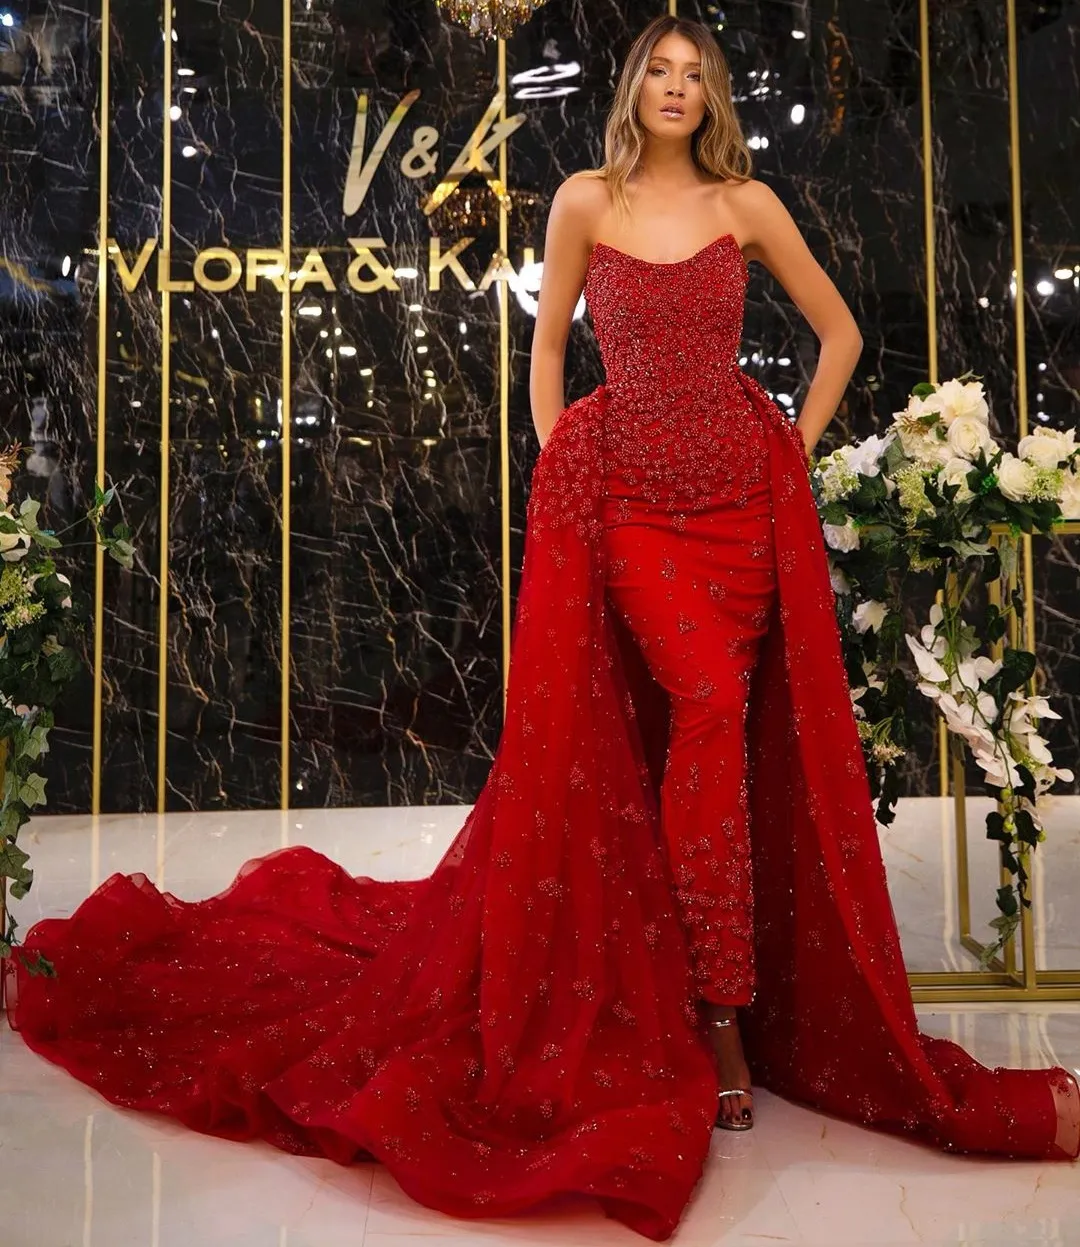 Romantic red lace sleeveless/long sleeves tiered skirt ball gown  wedding/prom dress with train - various styles